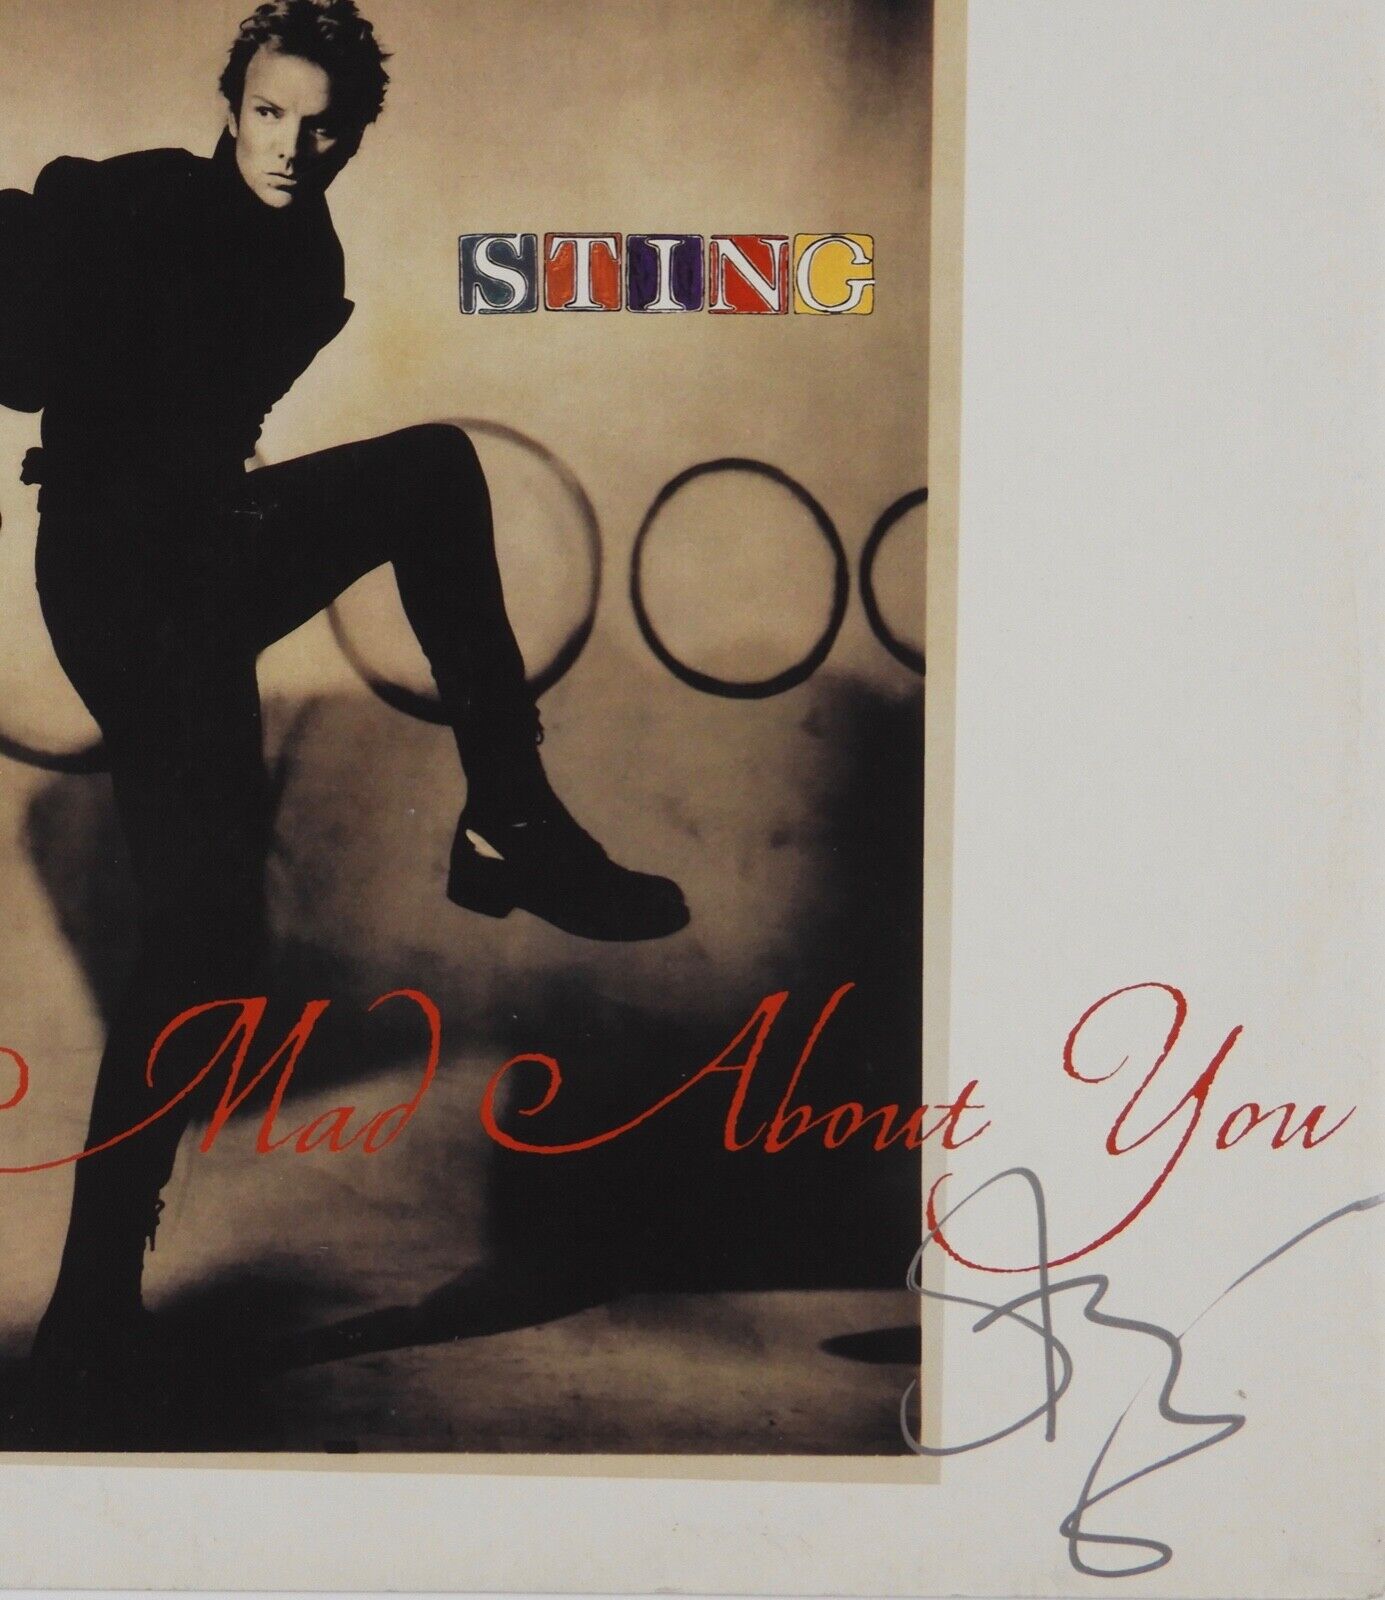 Sting Mad About You Signed Autograph Record Album JSA Vinyl Record